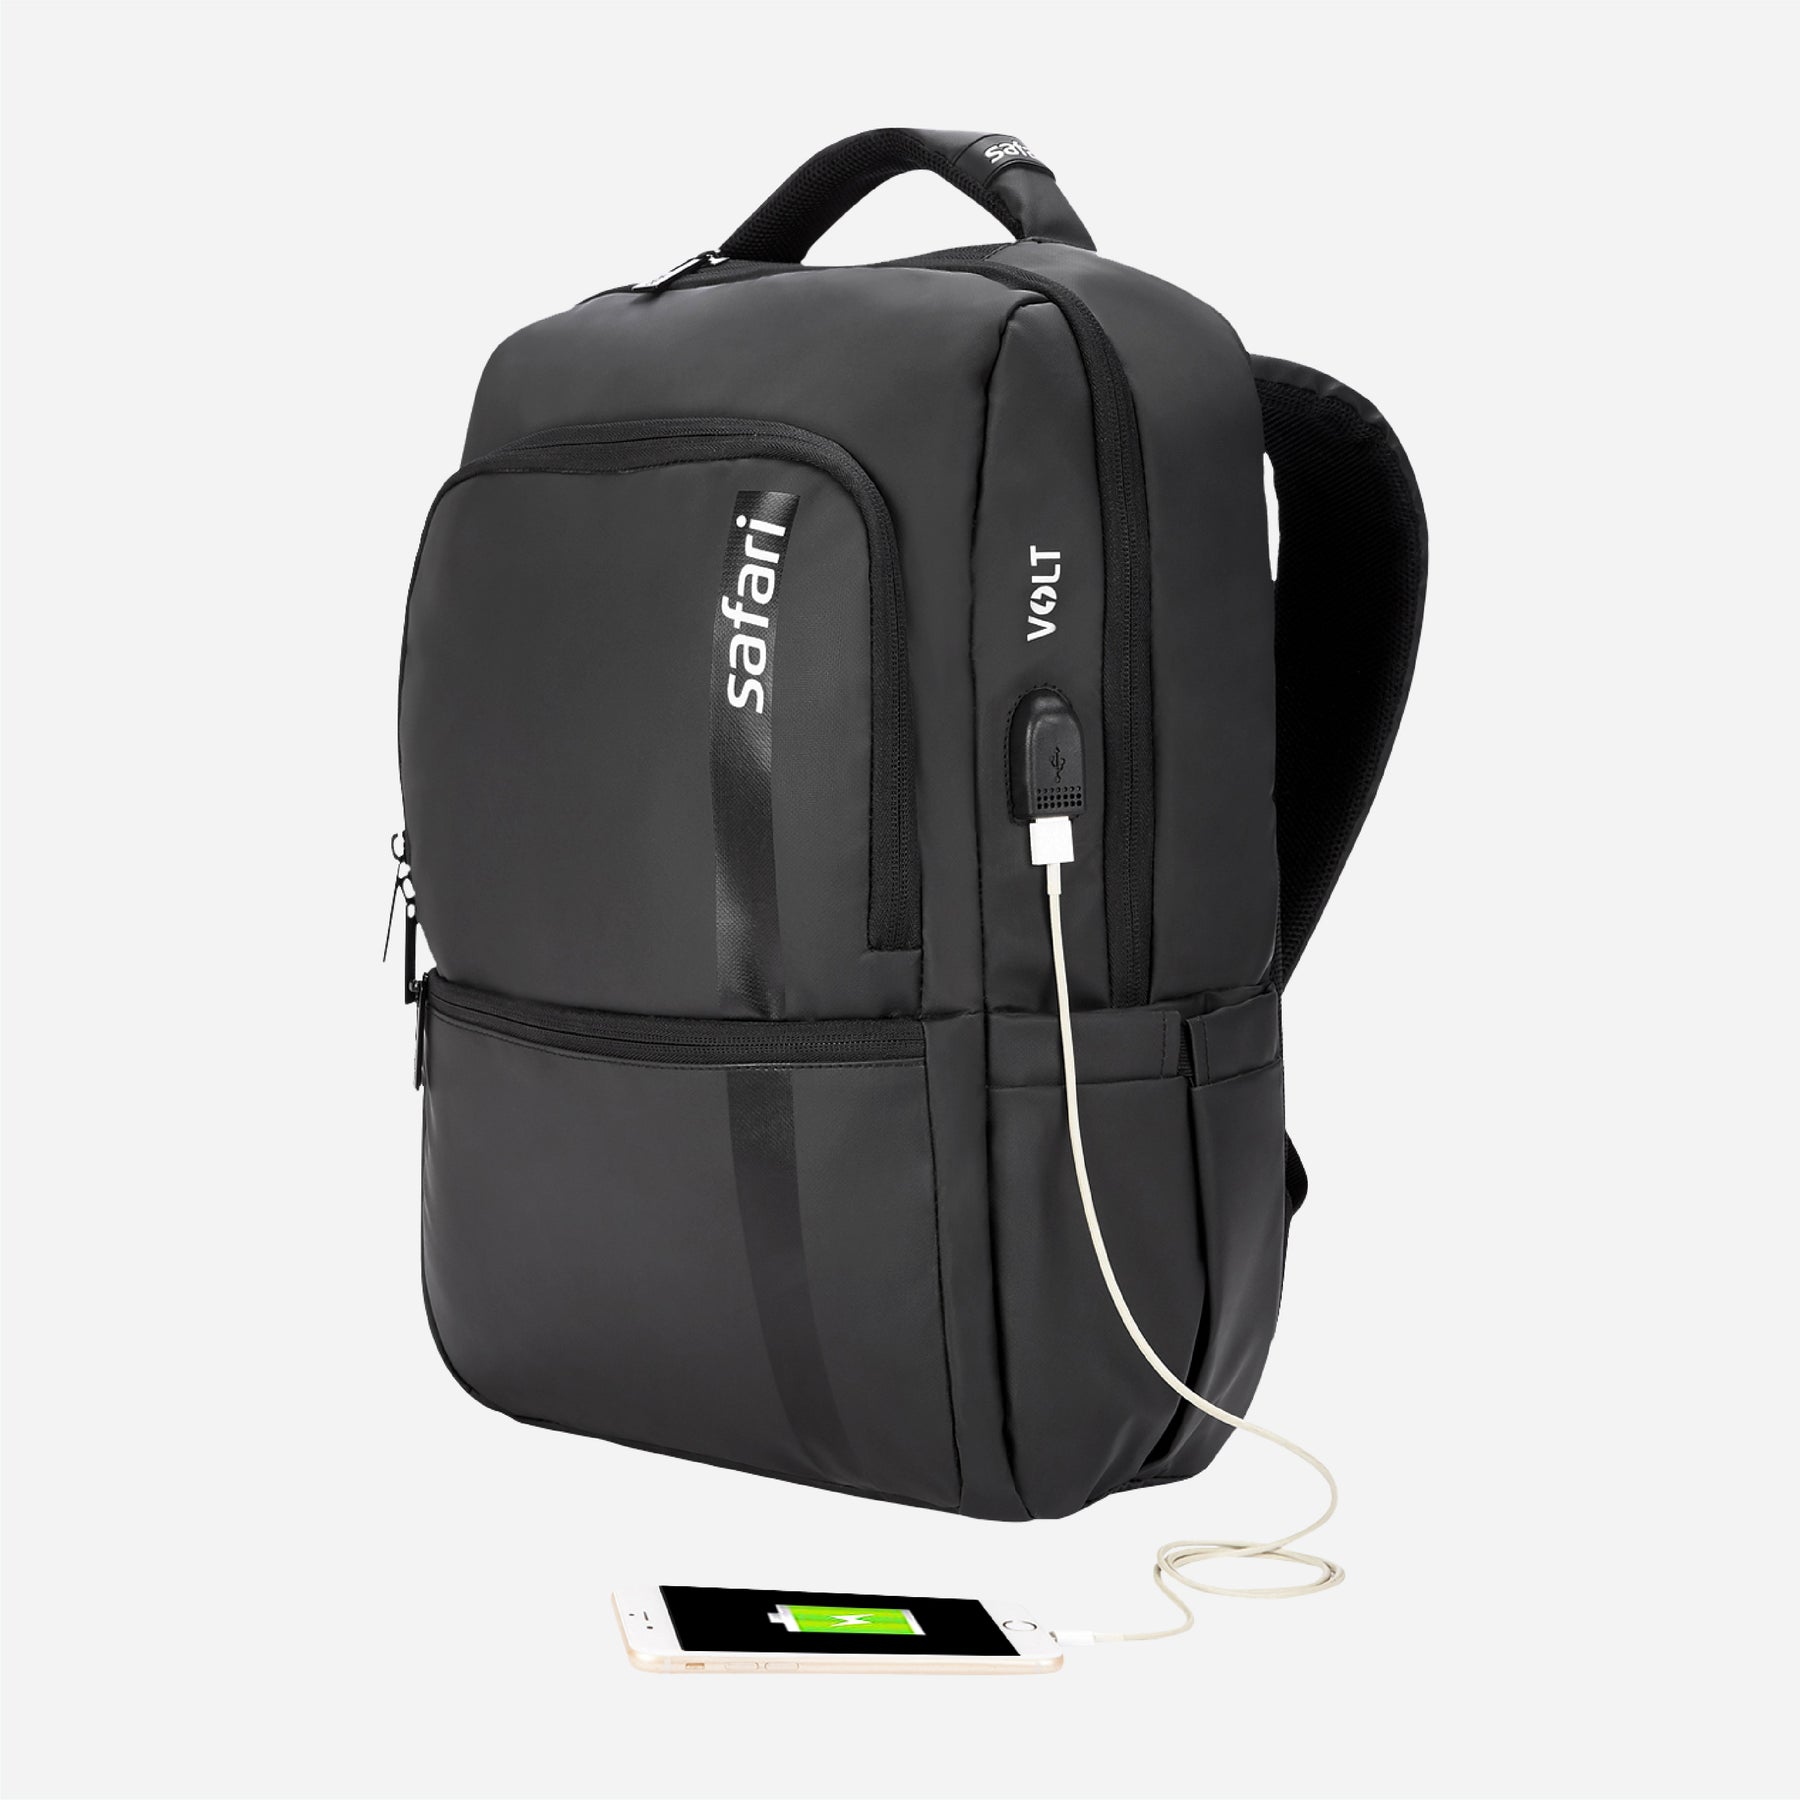 Cosmo Laptop Backpack with USB Port and Dust Resistant Fabric - Black